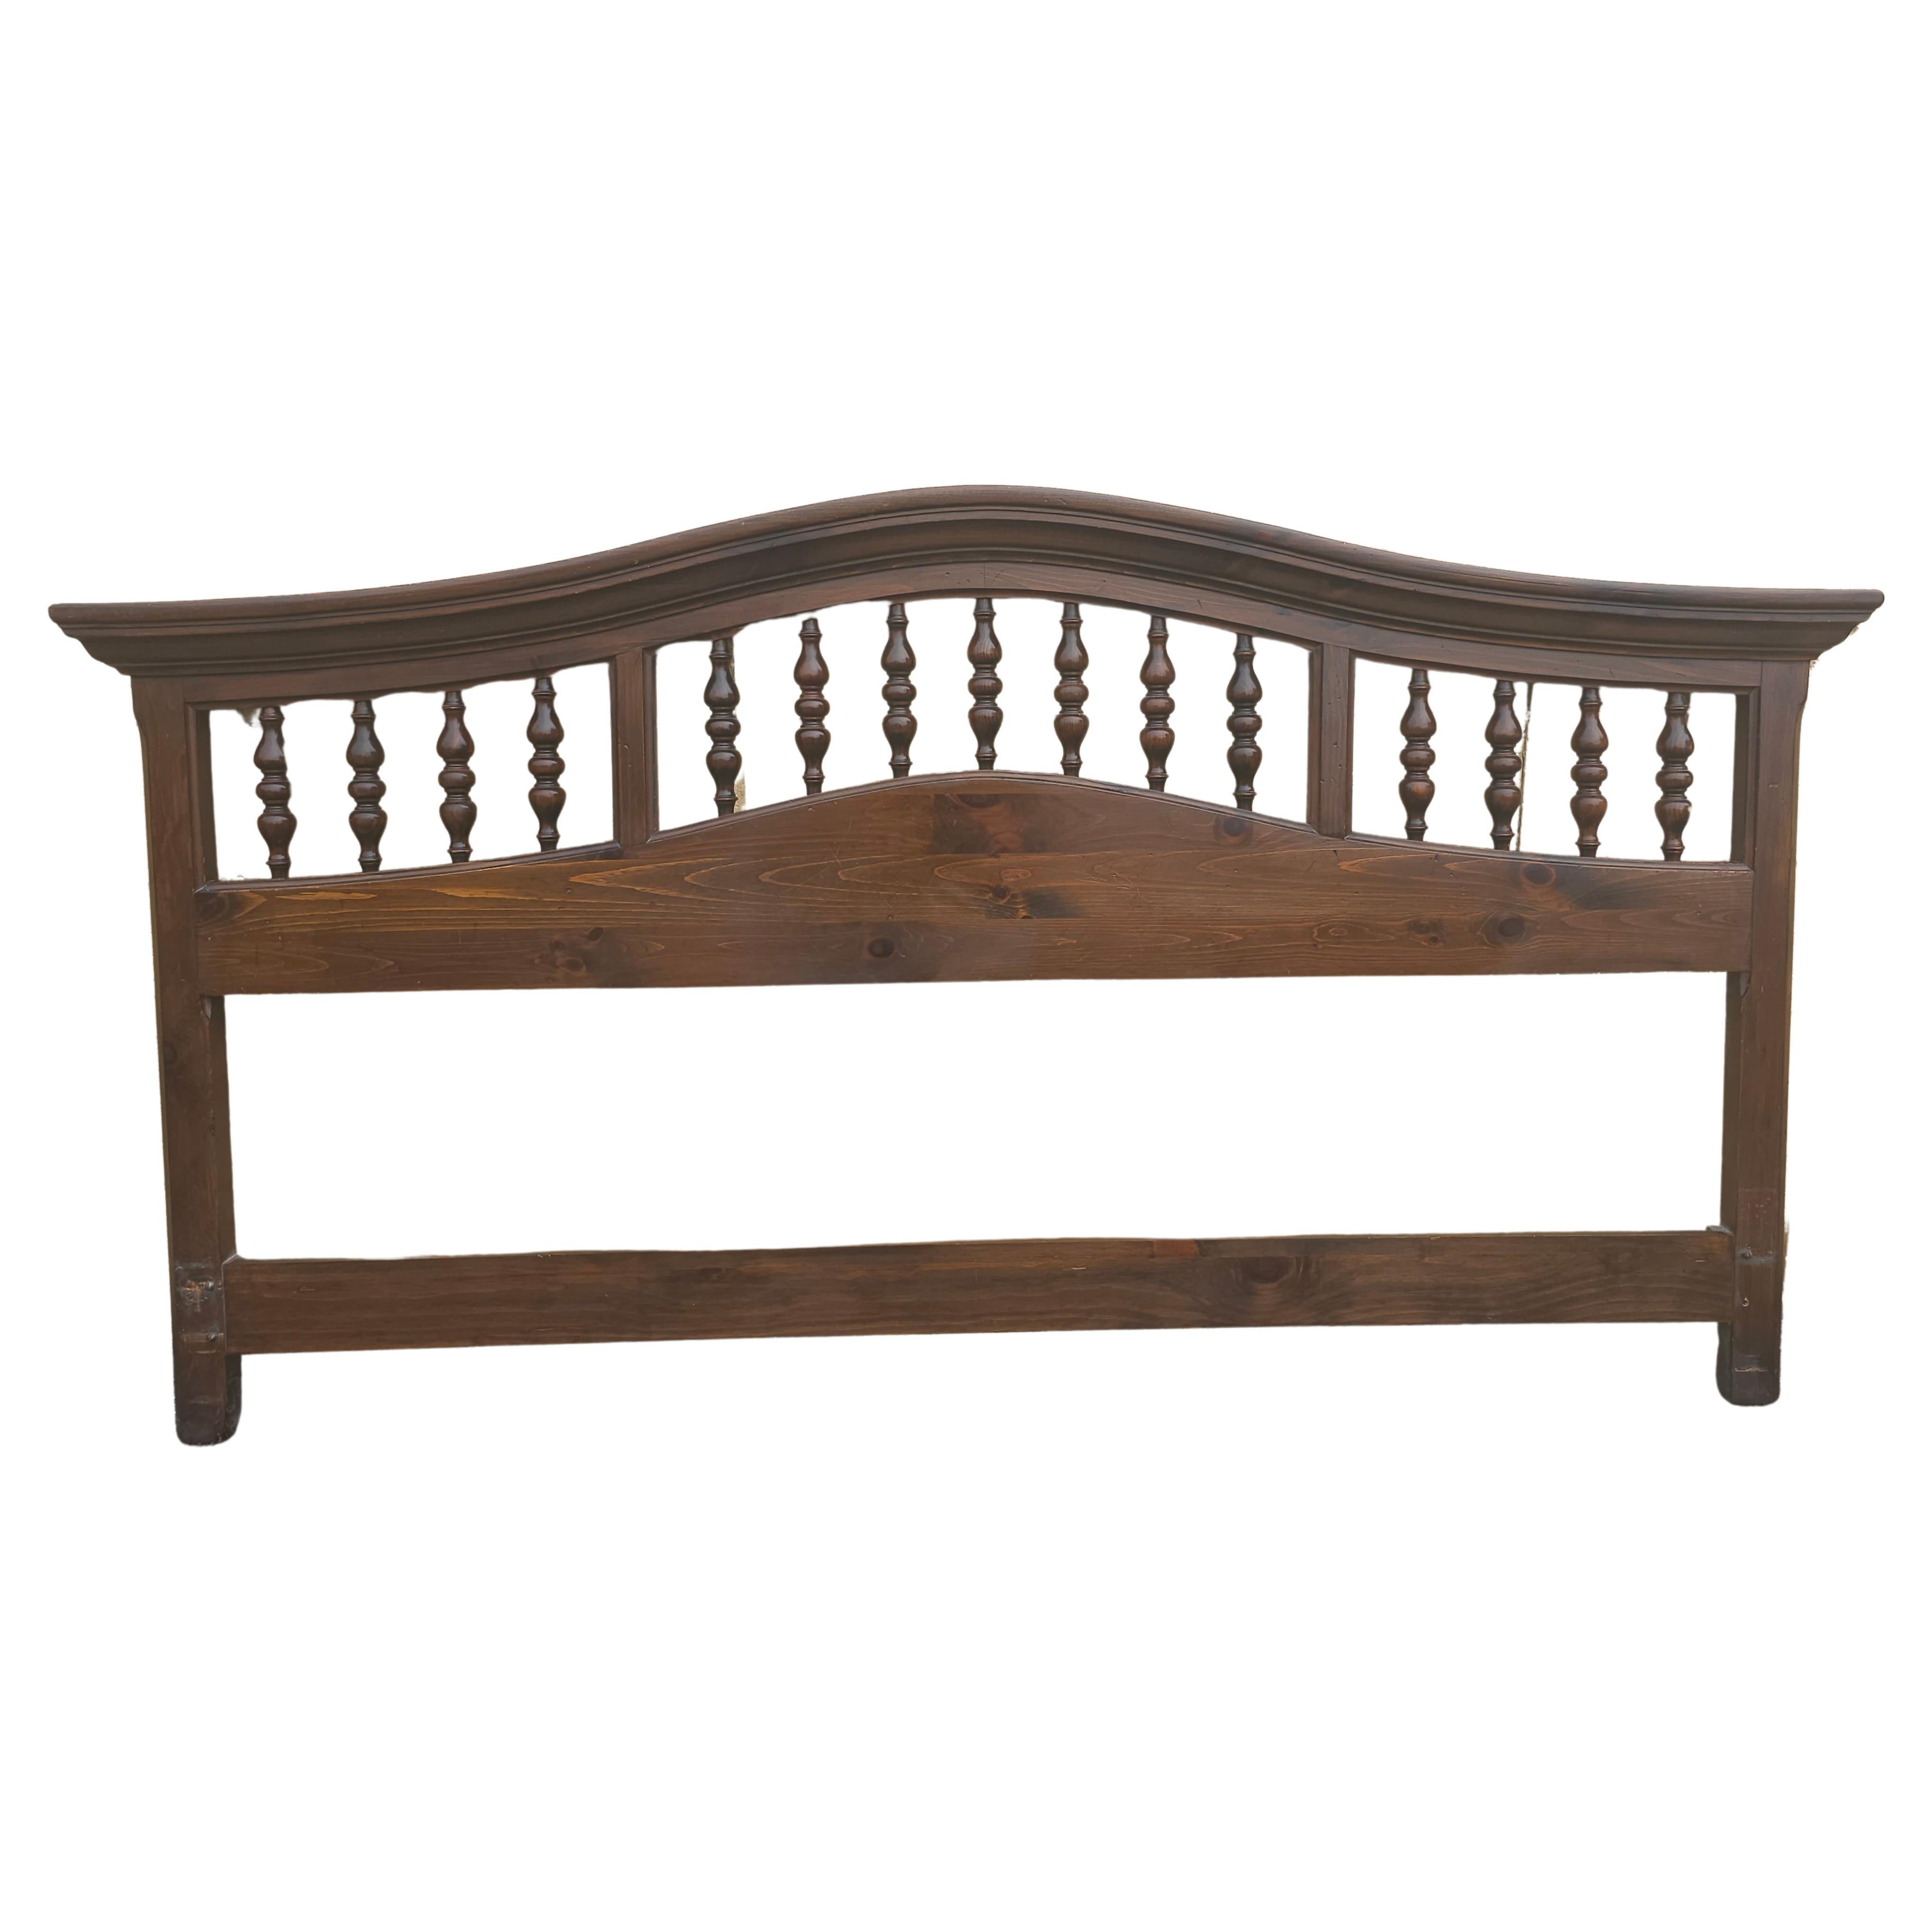 Mid-20th Century Antiqued Pine King Size Arched Top Headboard